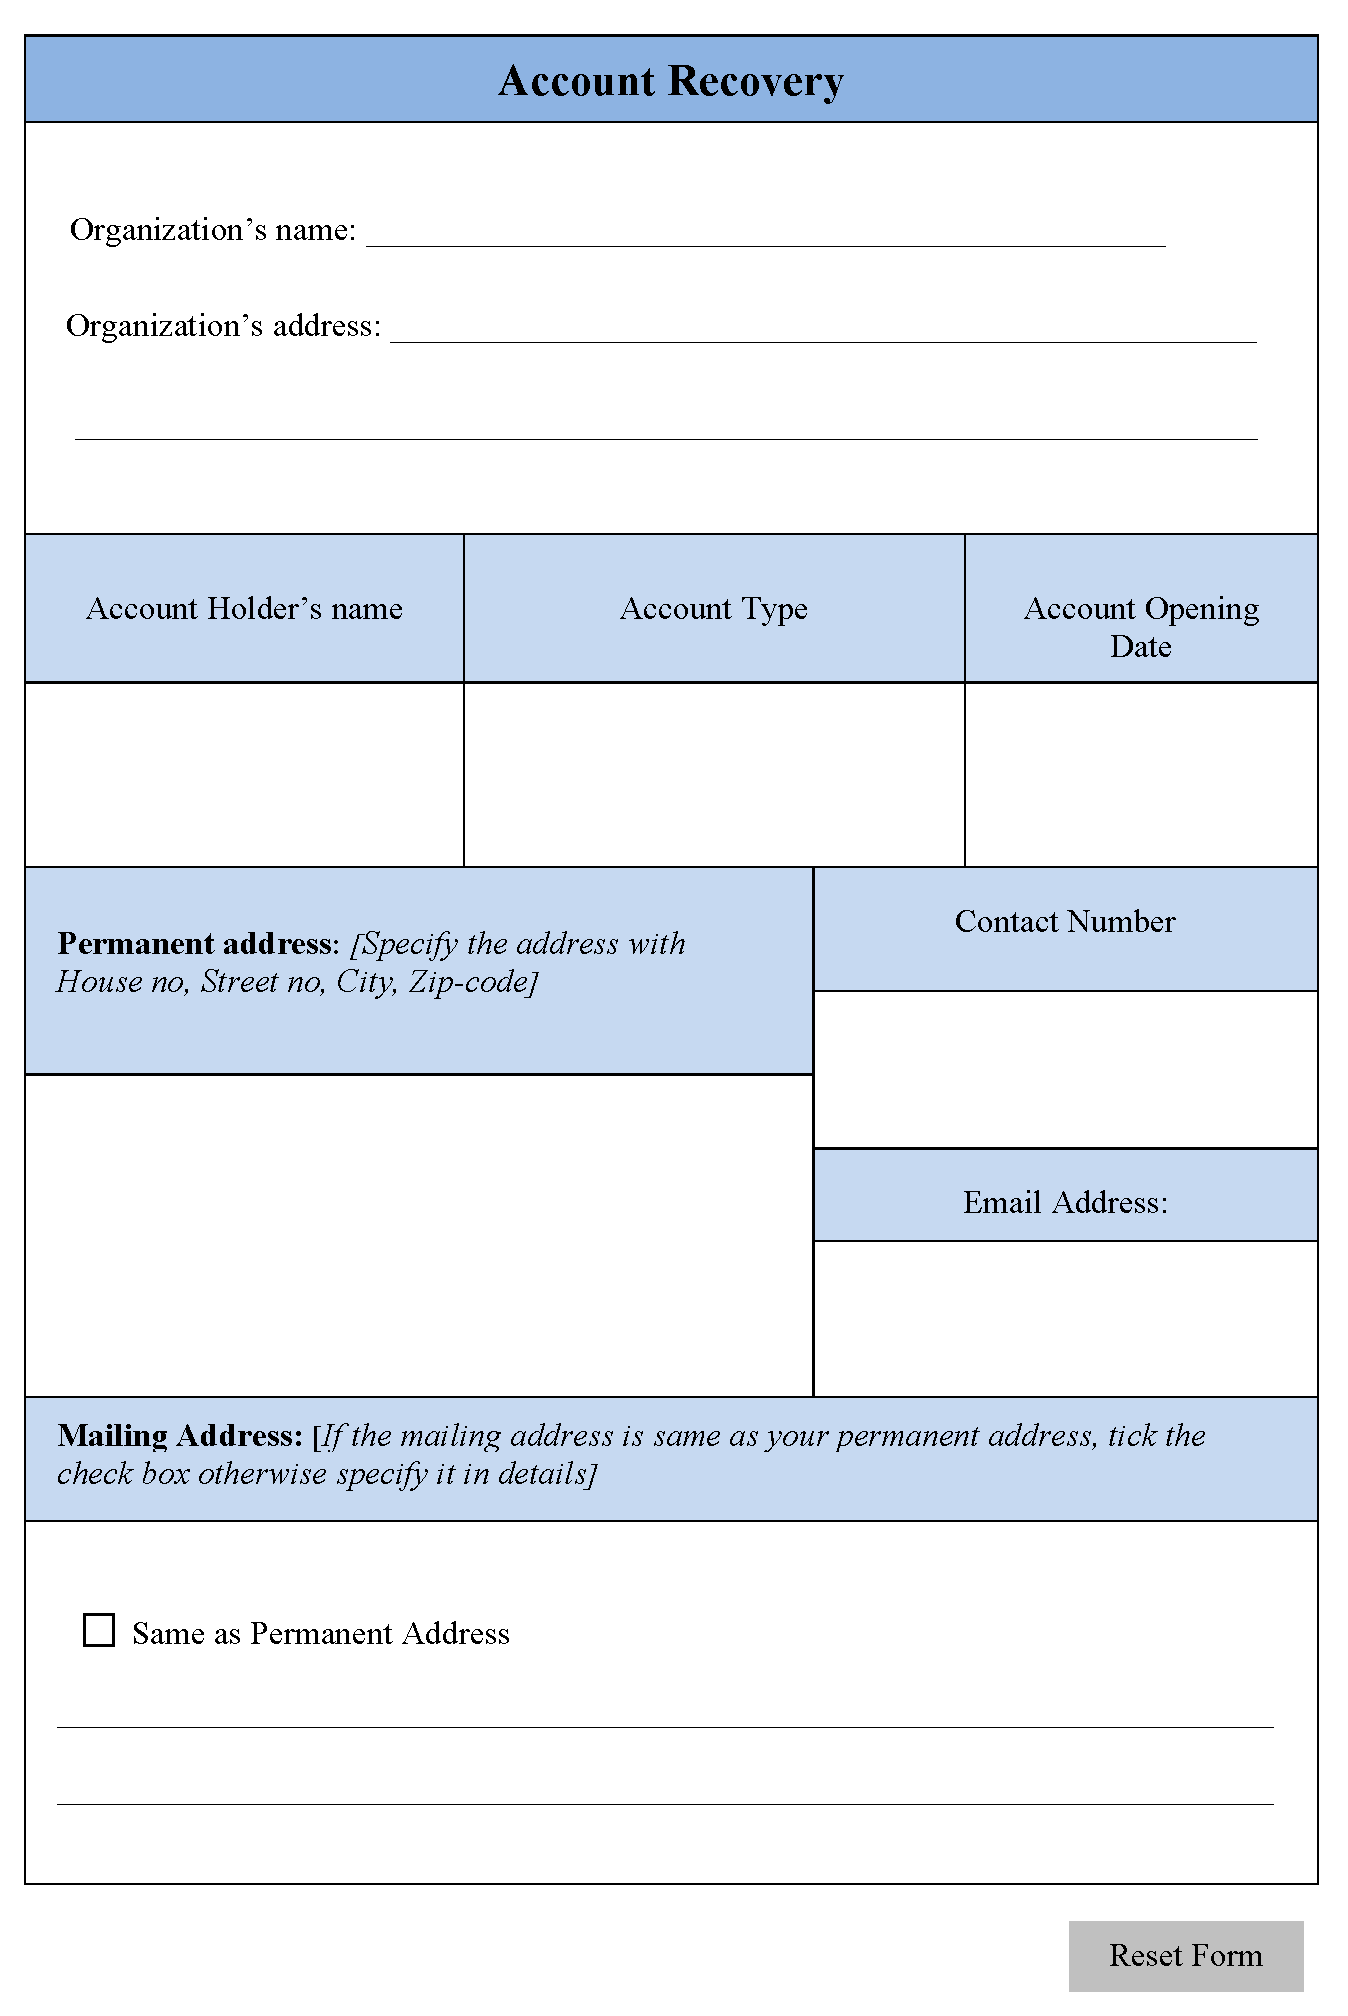 account-recovery-form-editable-forms